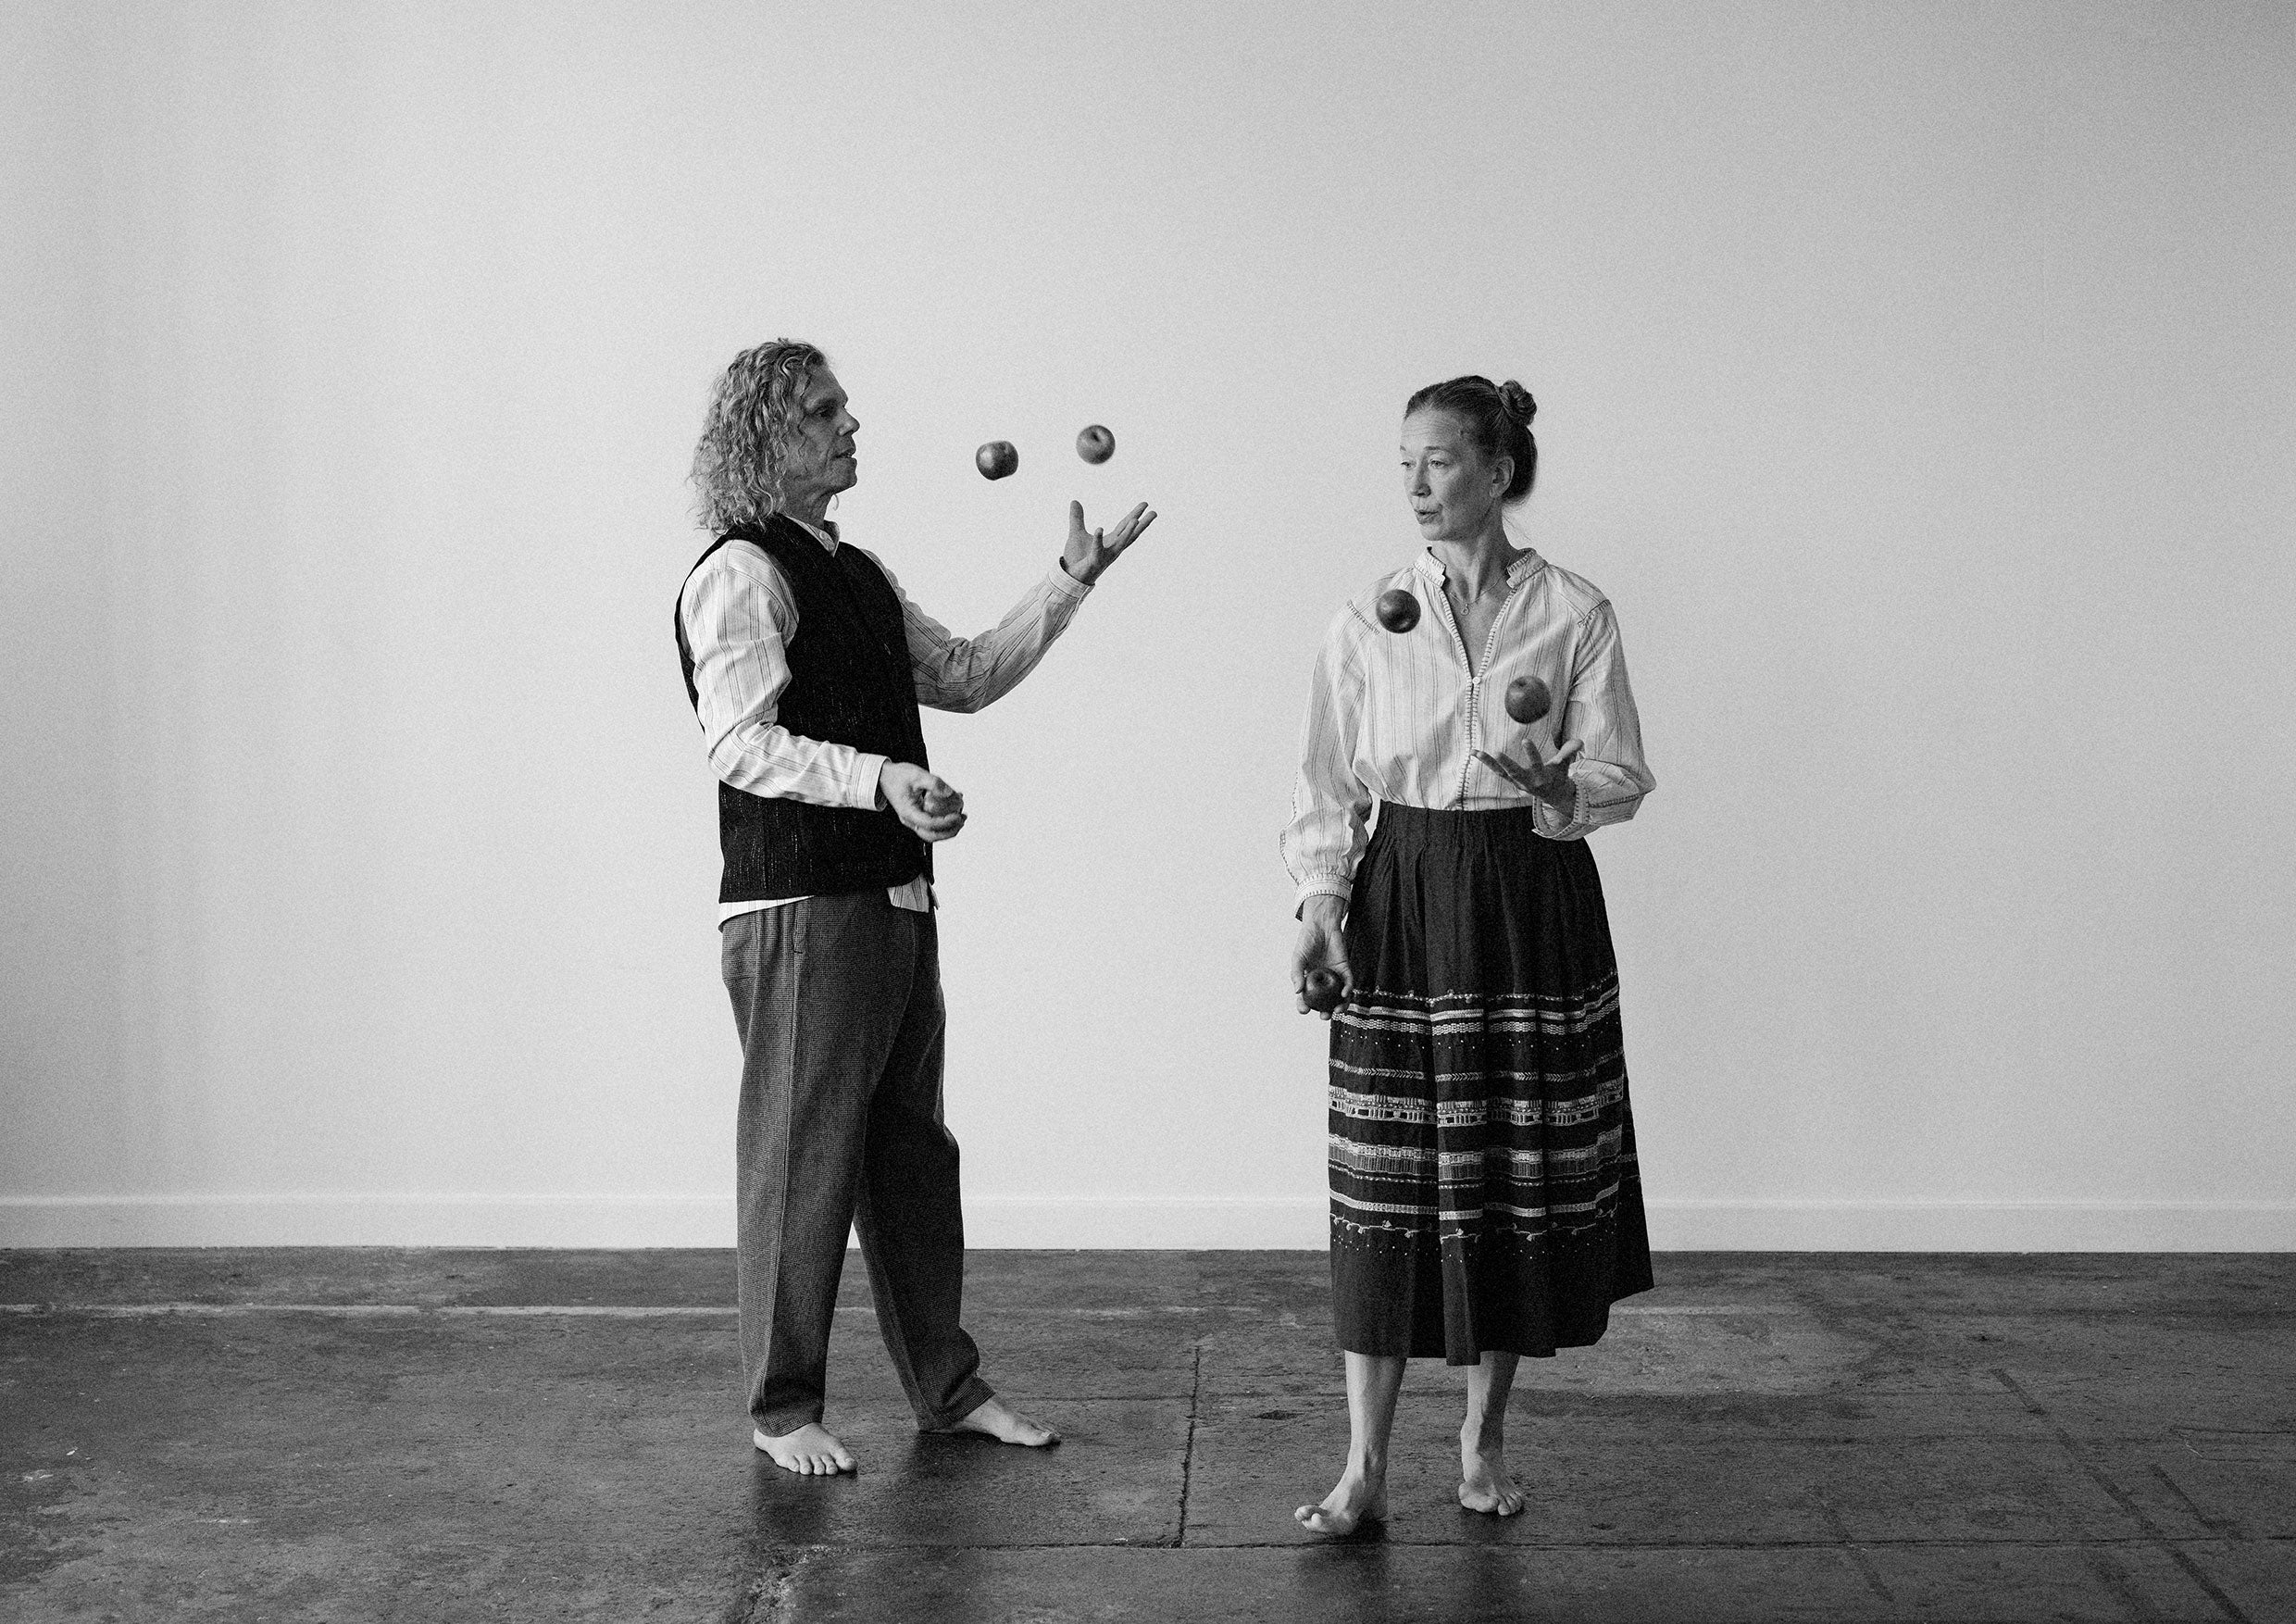 Black and white photograph of two jugglers